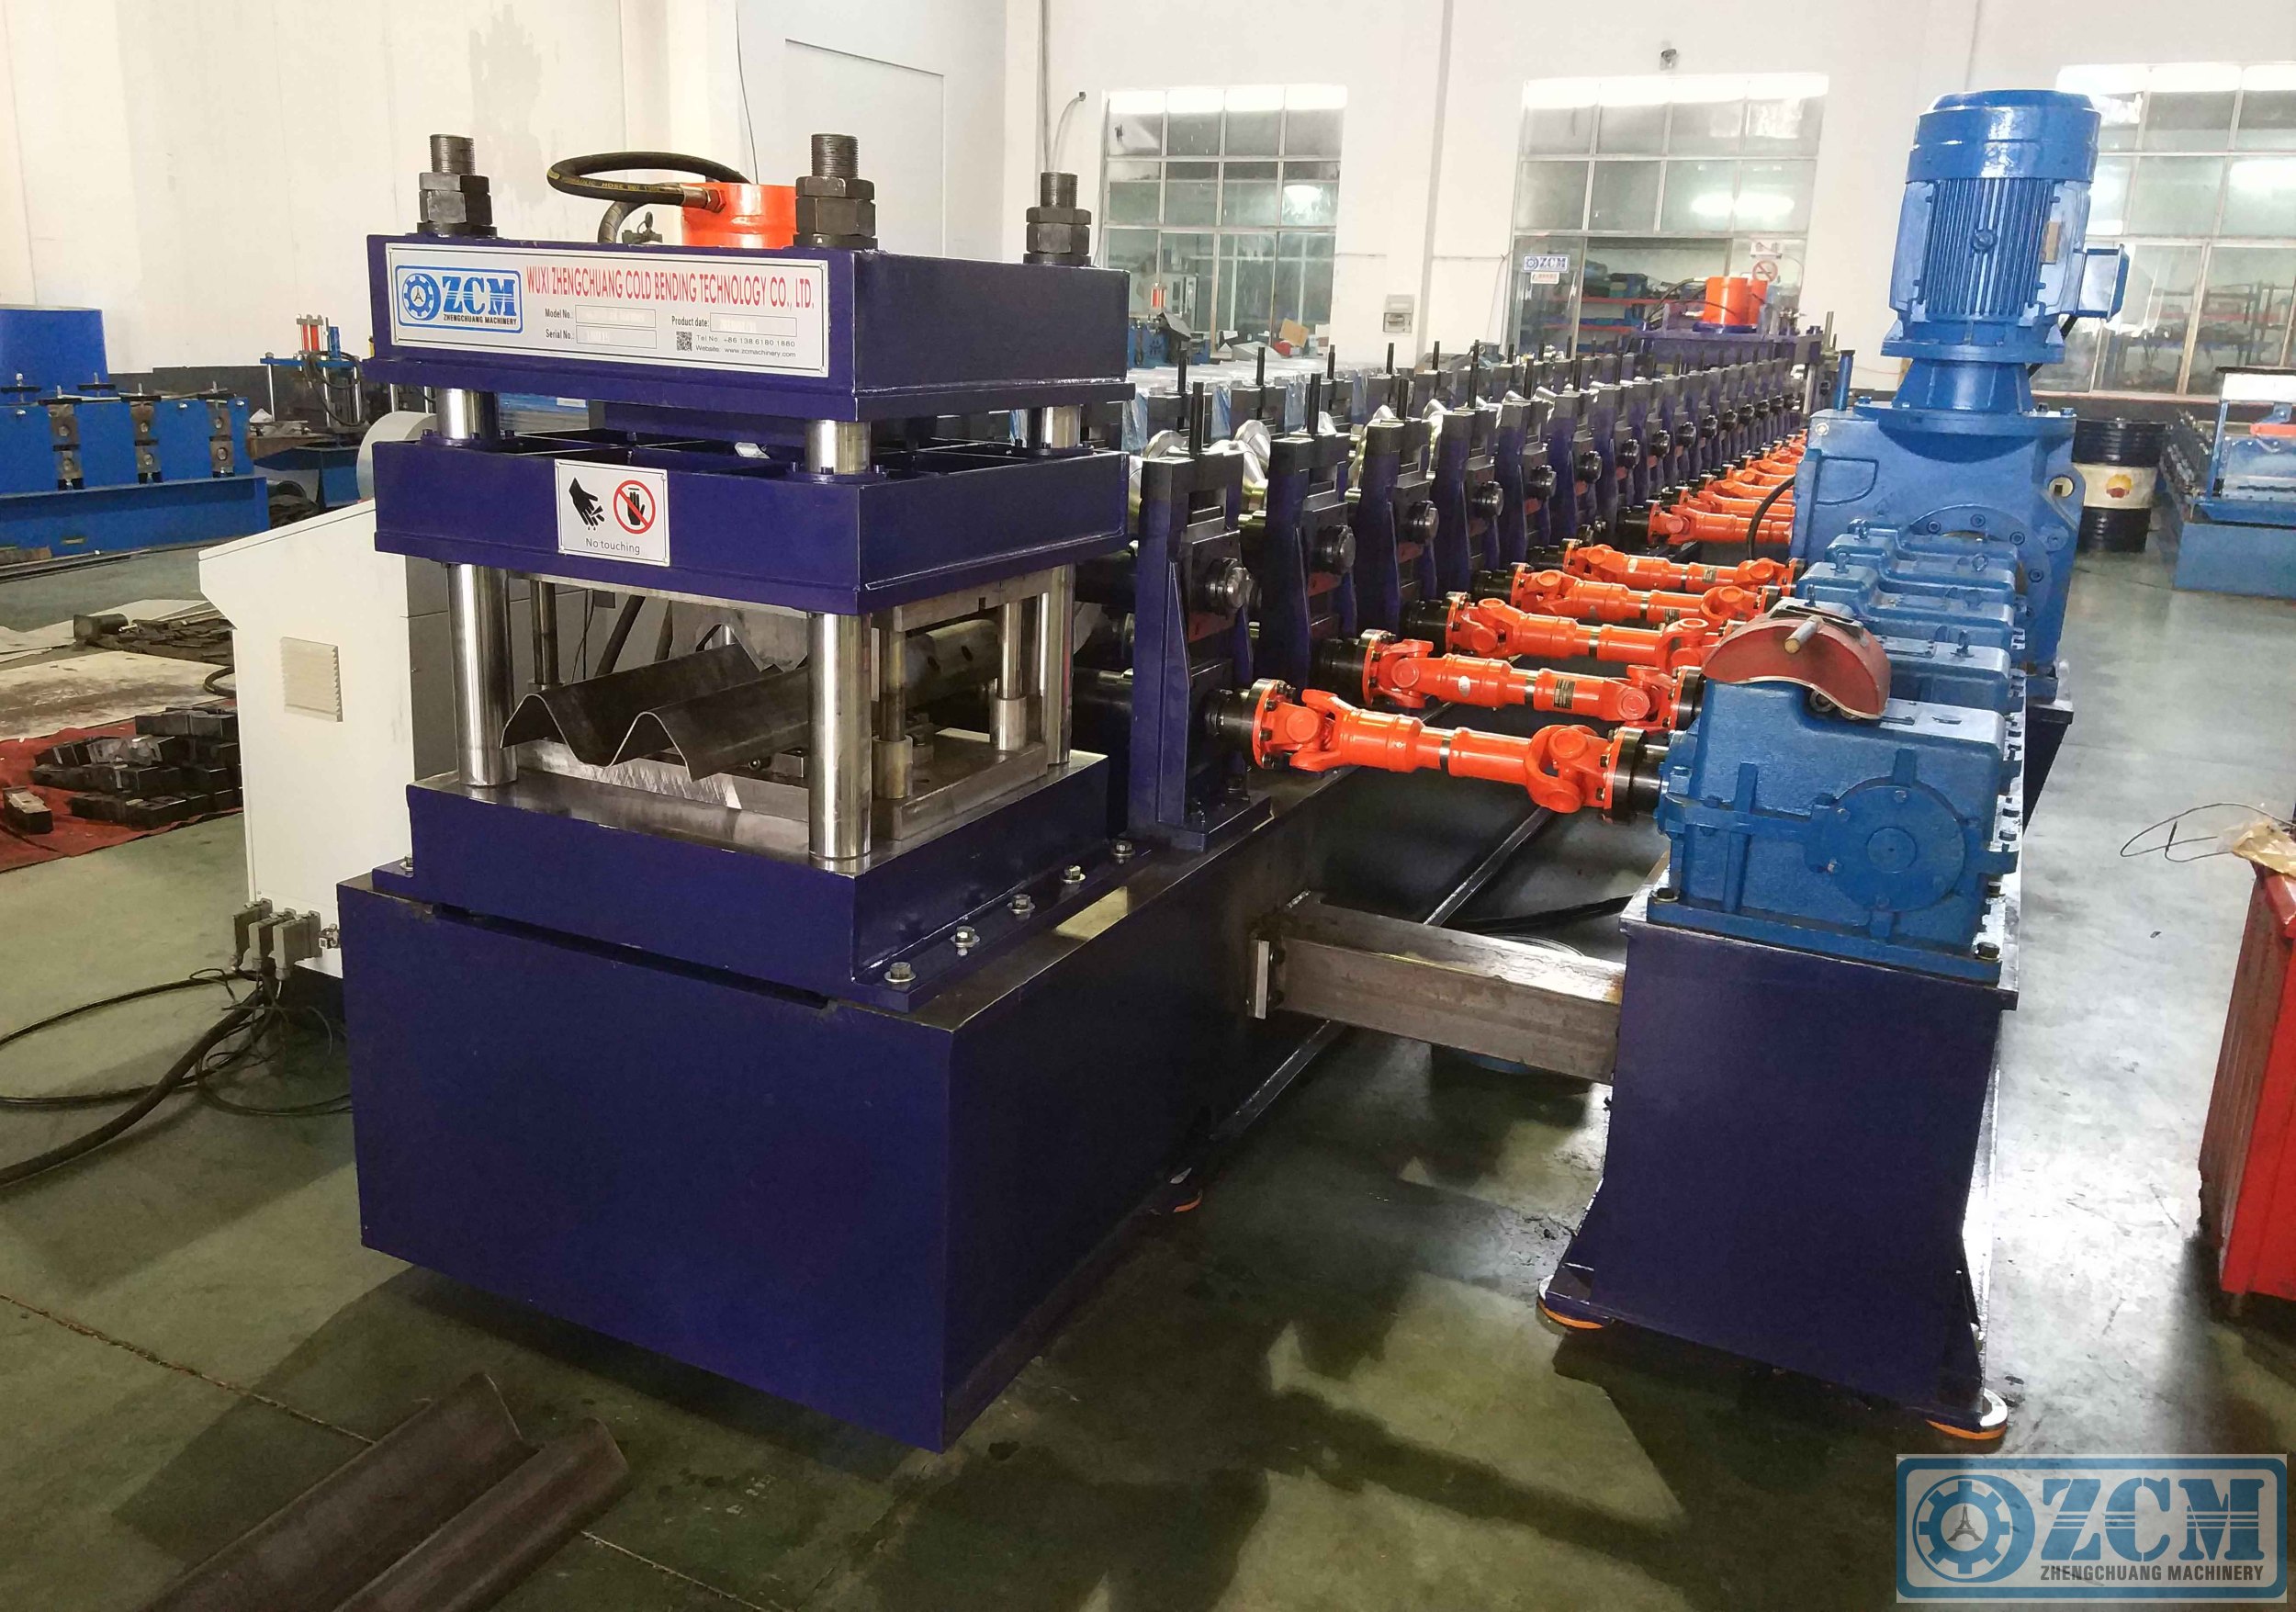 Two Waves Guardrail Roll Forming Machine